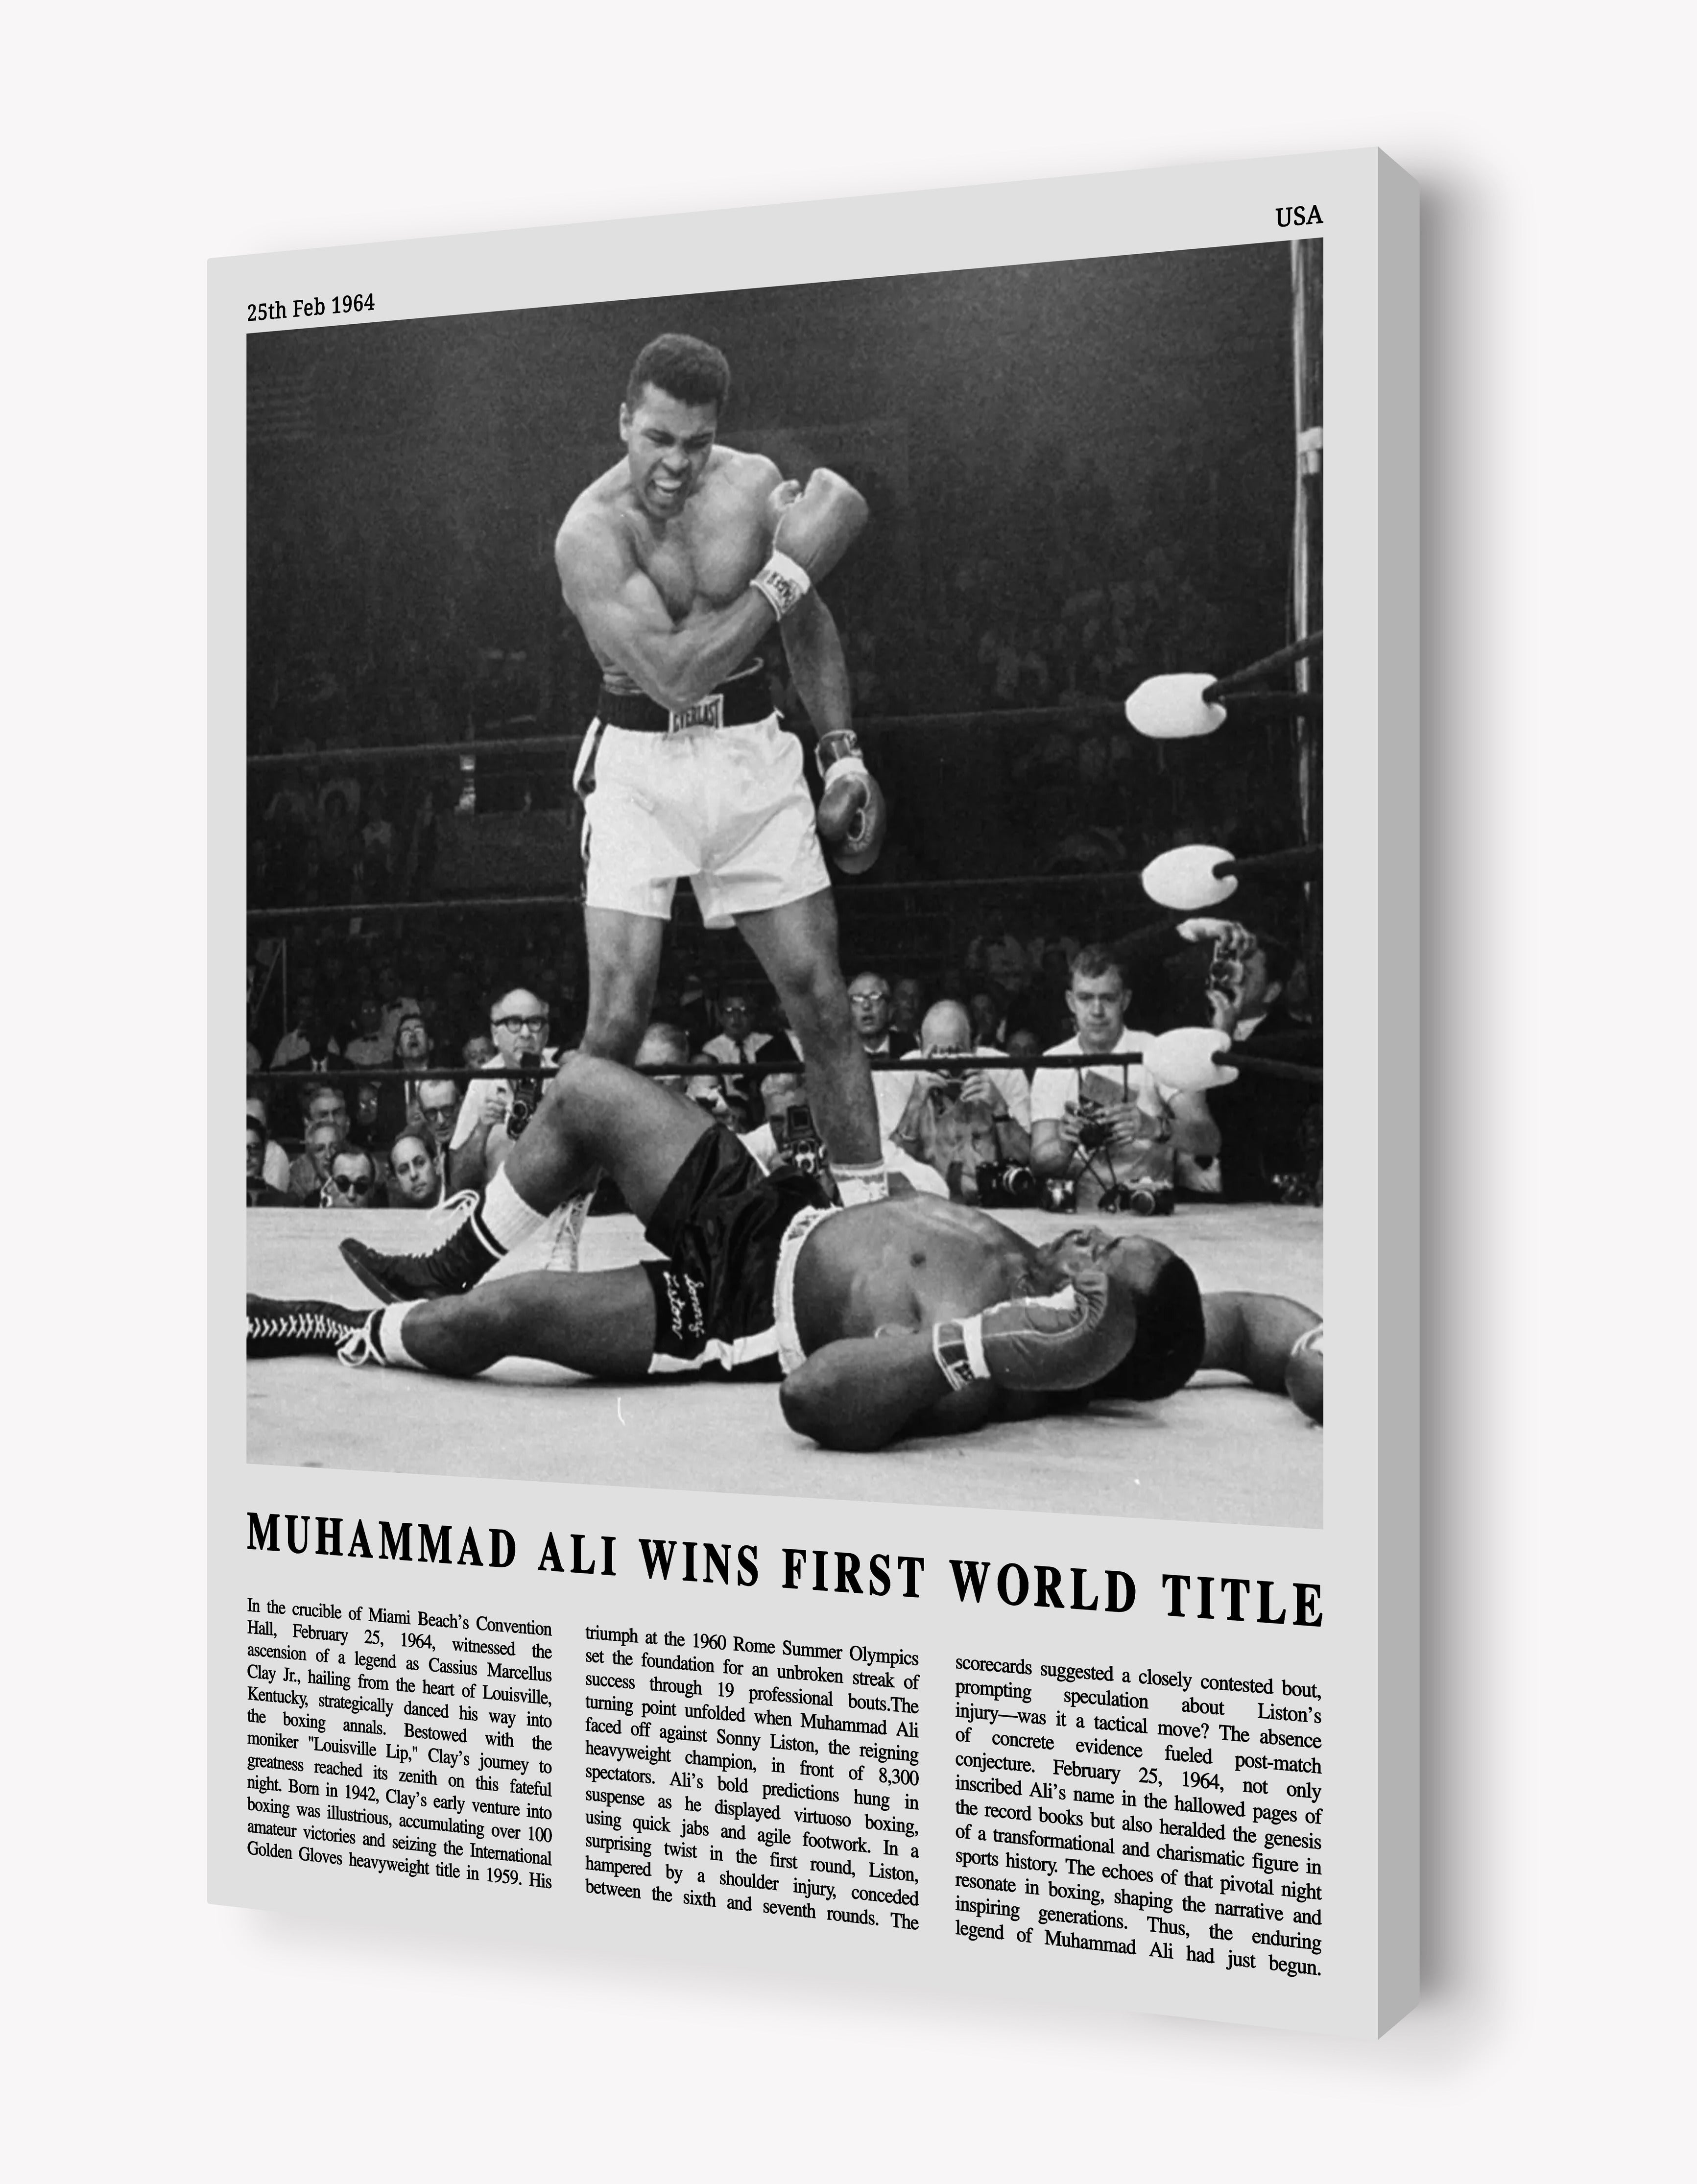 Ali's First World Title